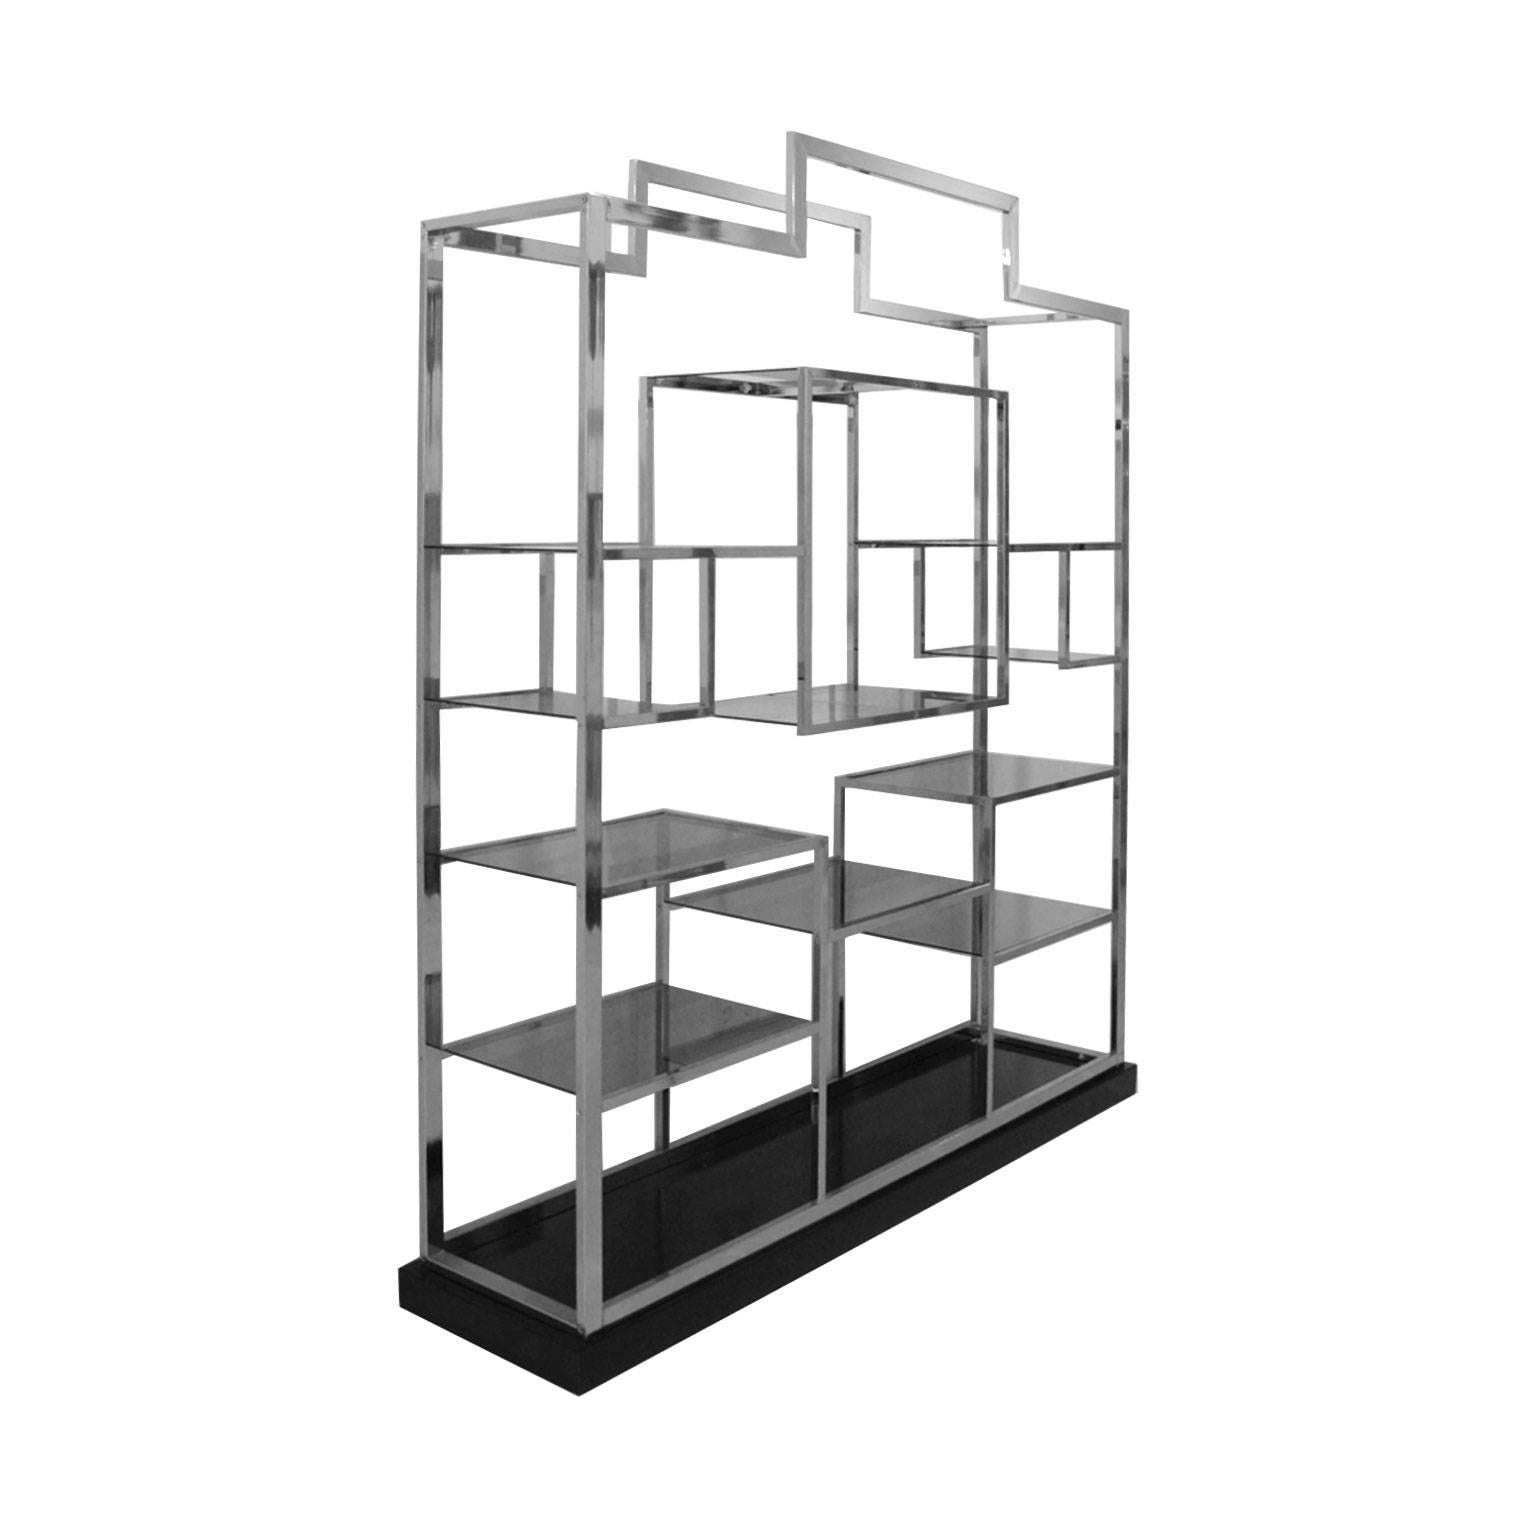 Large shelve designed by Romeo Rega. Structure made of square steel frame and black lacquer wood base. Composed by eleven shelves made of dark crystal.

Romeo Rega is one of several 1970s-era Italian designers. Rega’s work is common among lovers